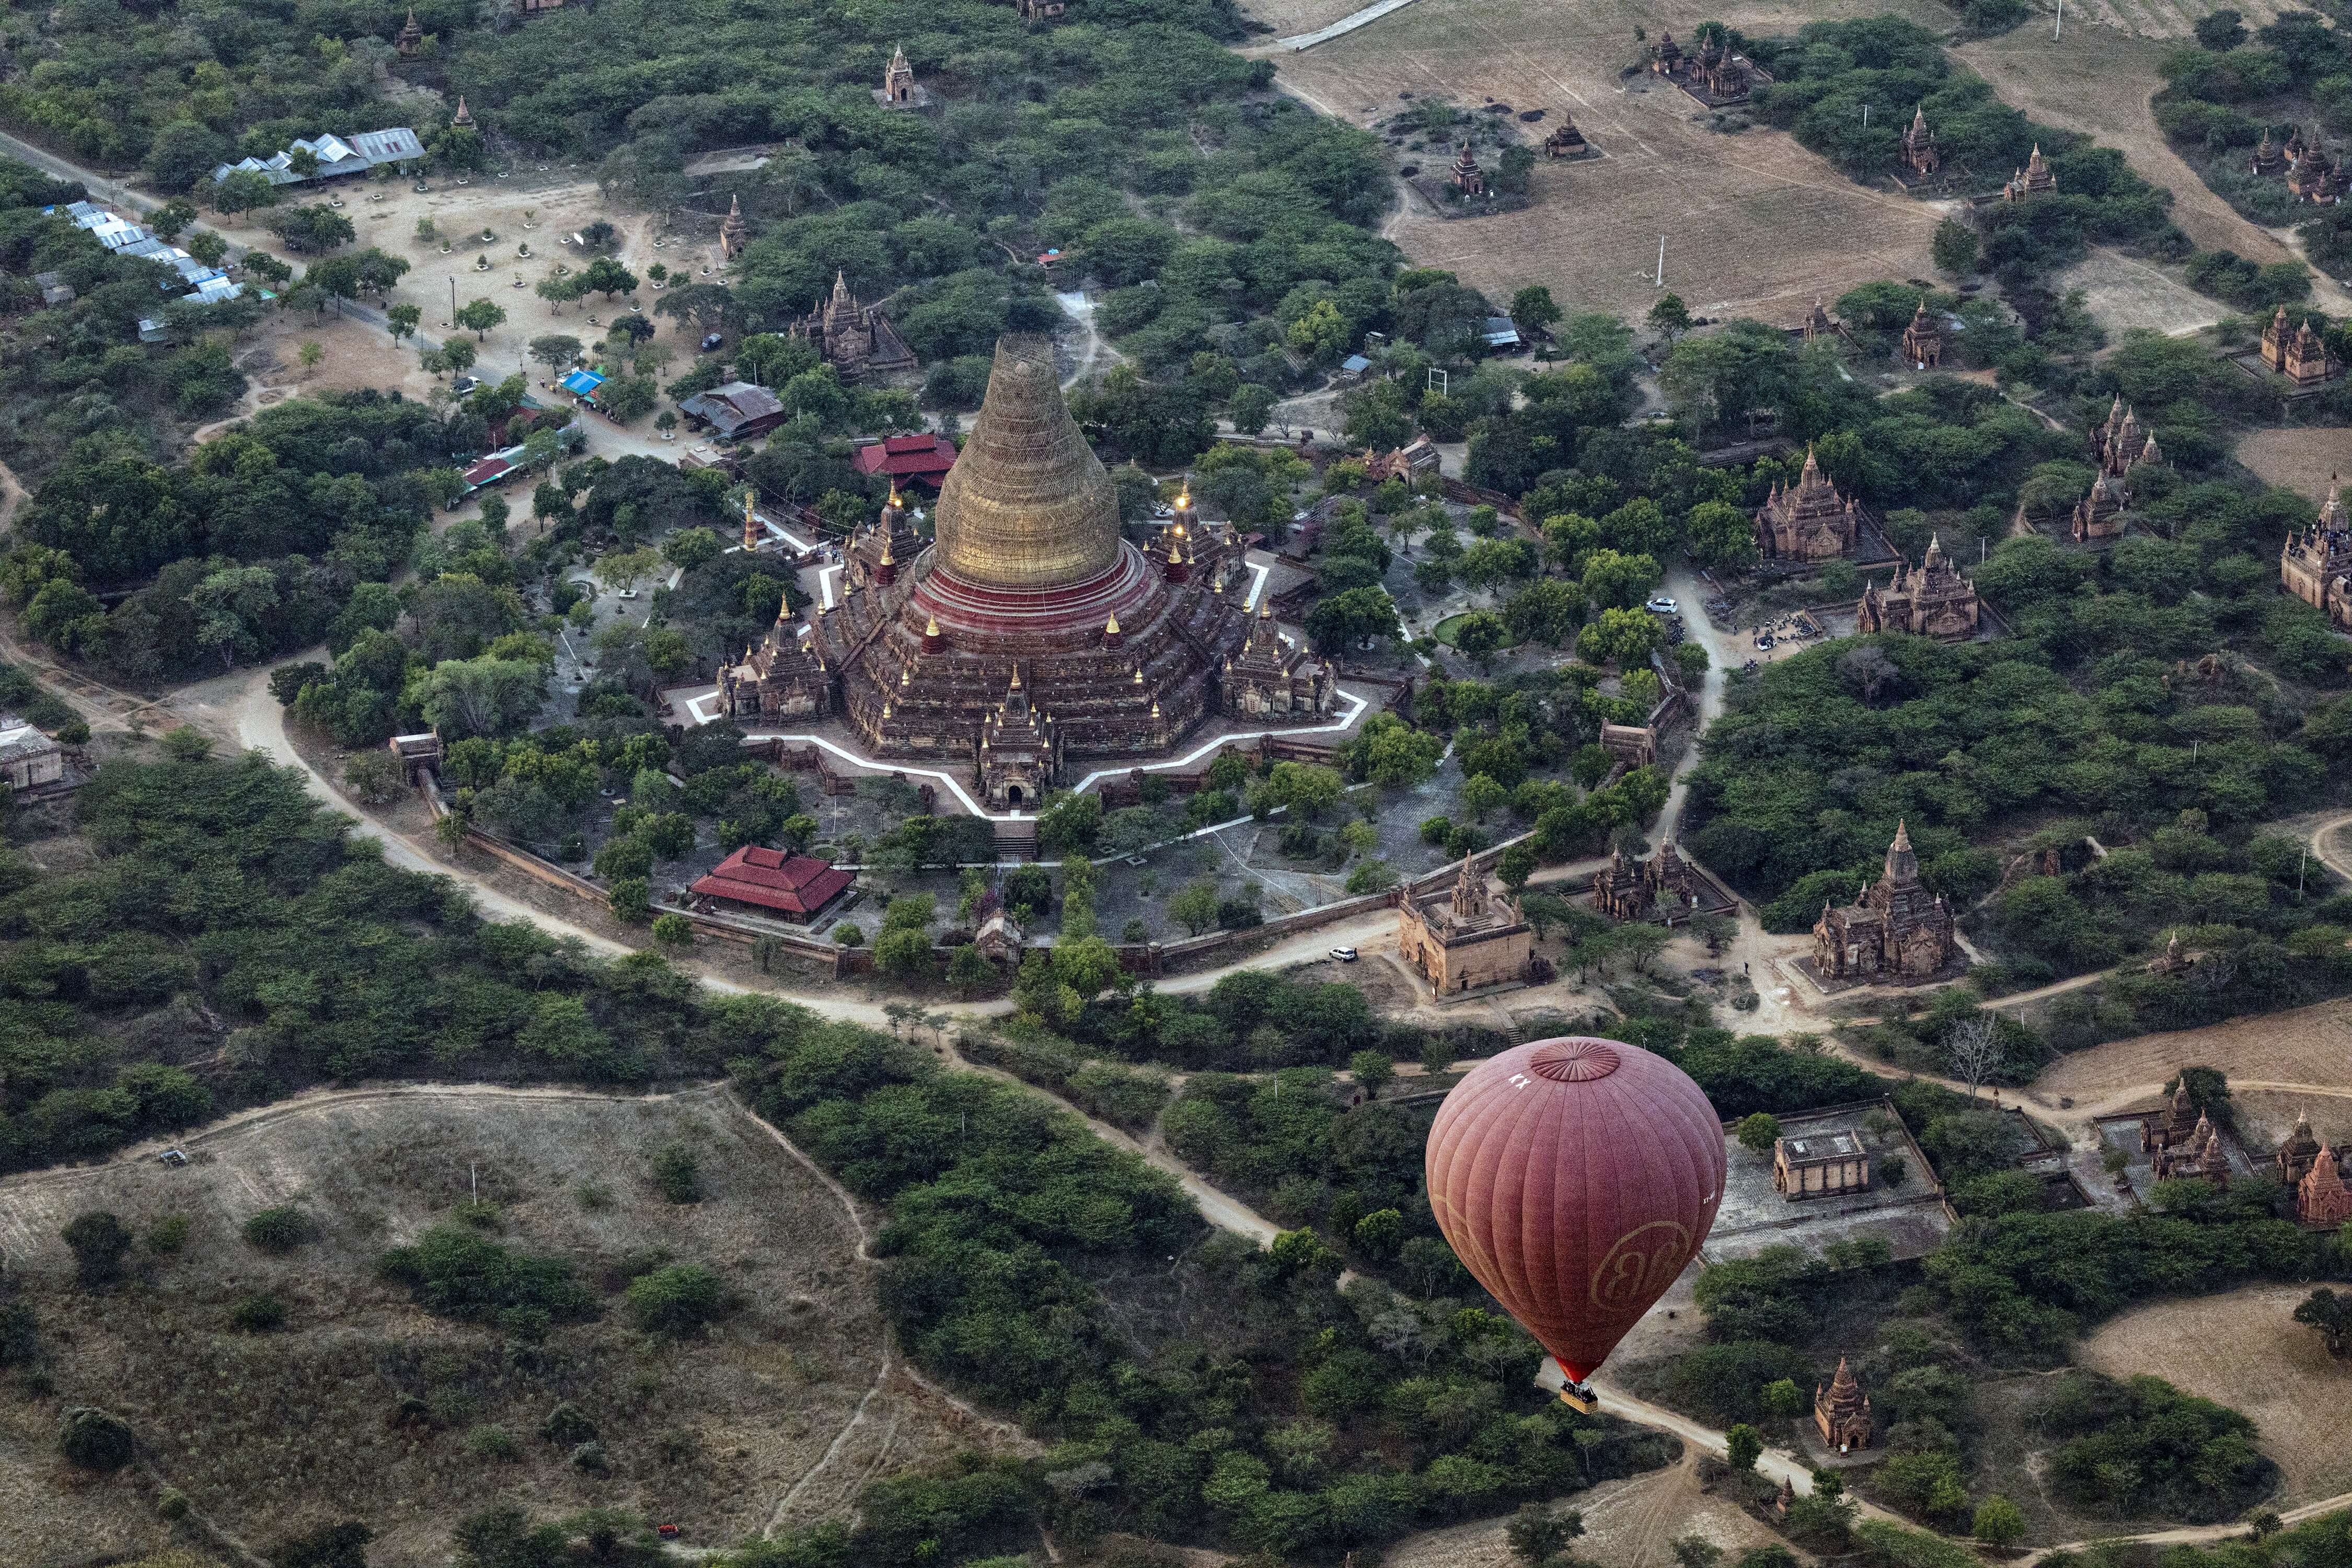 Floating over the temples in Bagan